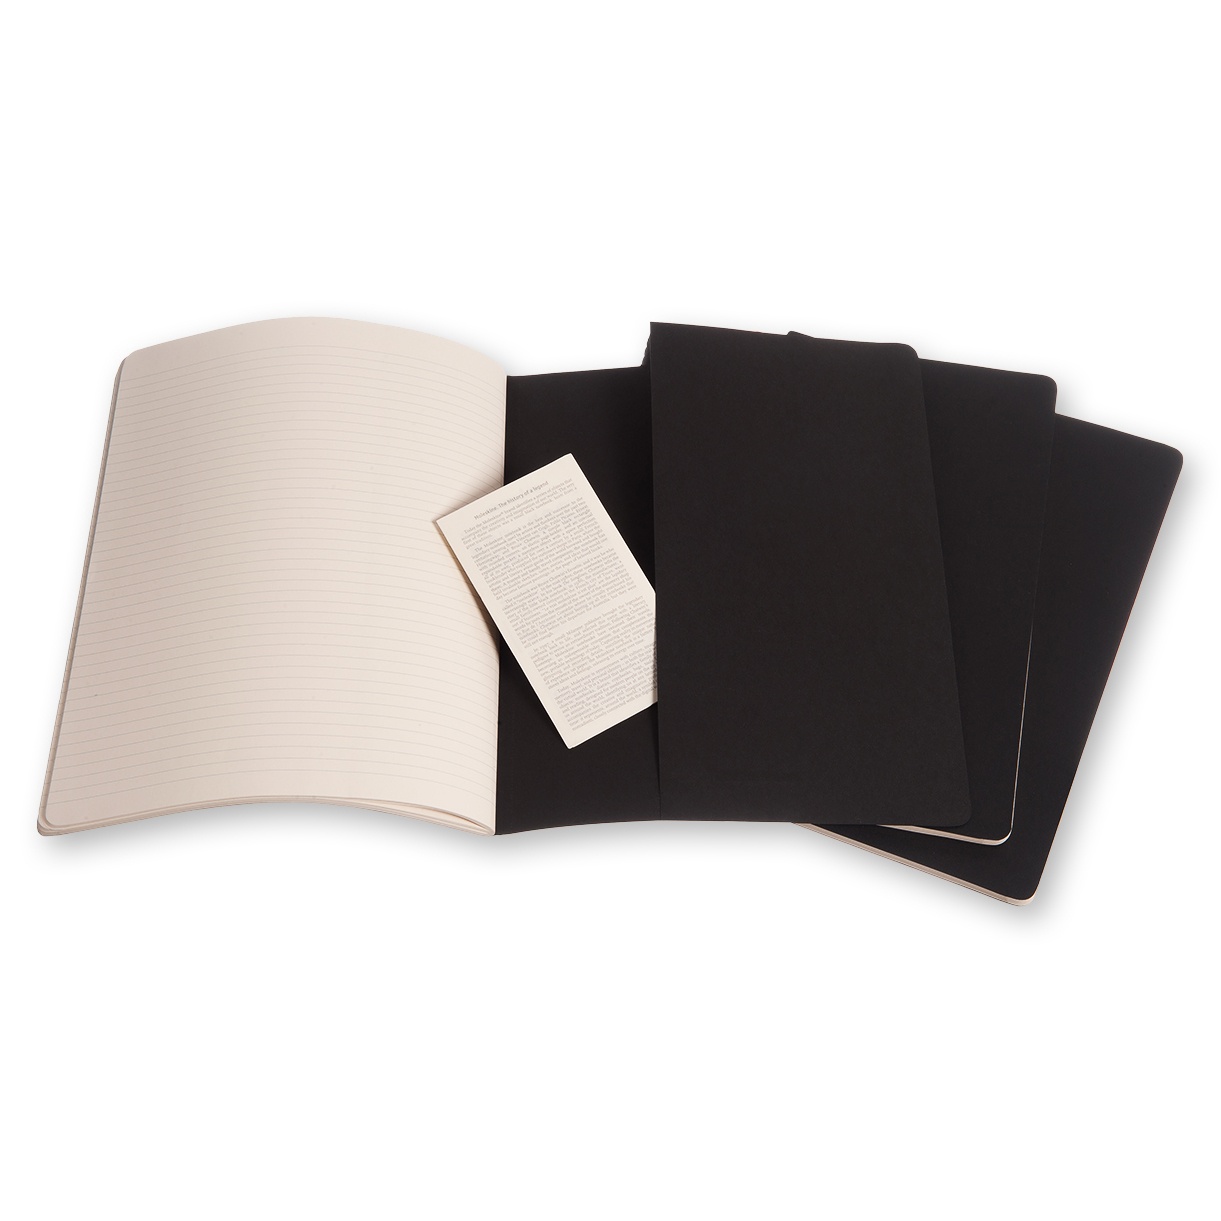 Cahier XXL Black Plain in the group Paper & Pads / Note & Memo / Writing & Memo Pads at Pen Store (100329)